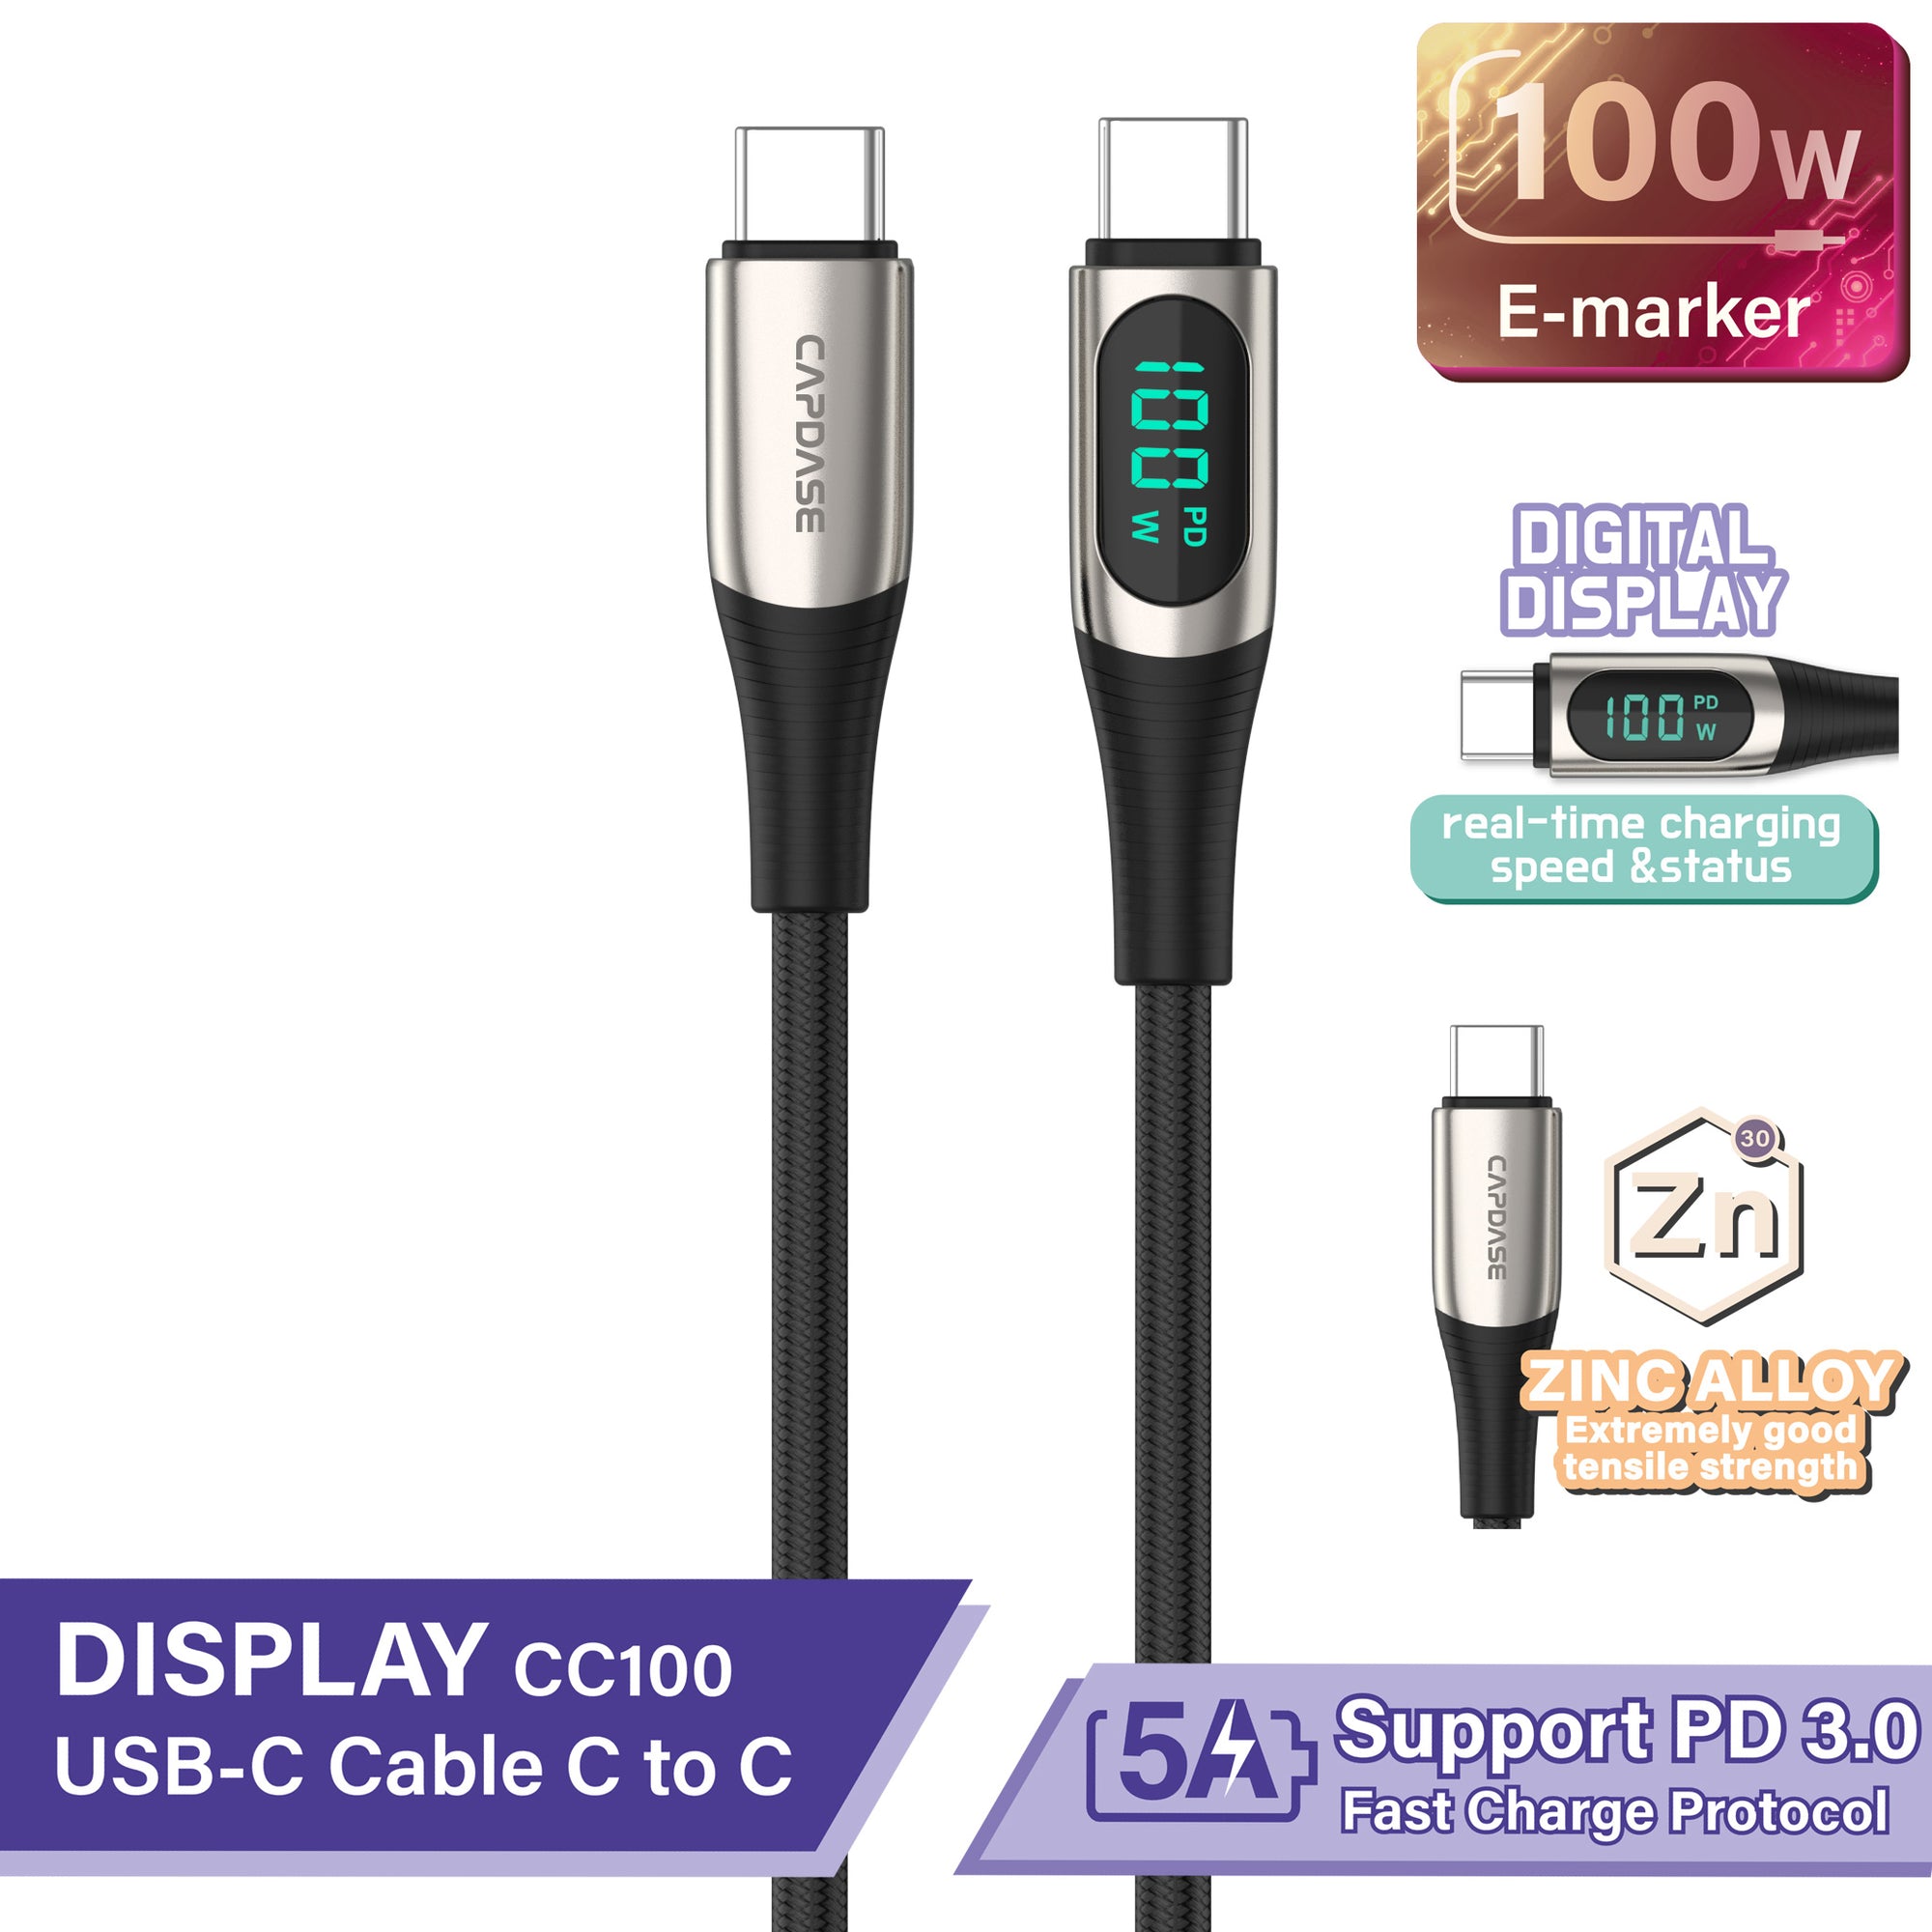 Display-CC100 USB-C To USB C Sync and Charge Cable 1.2M